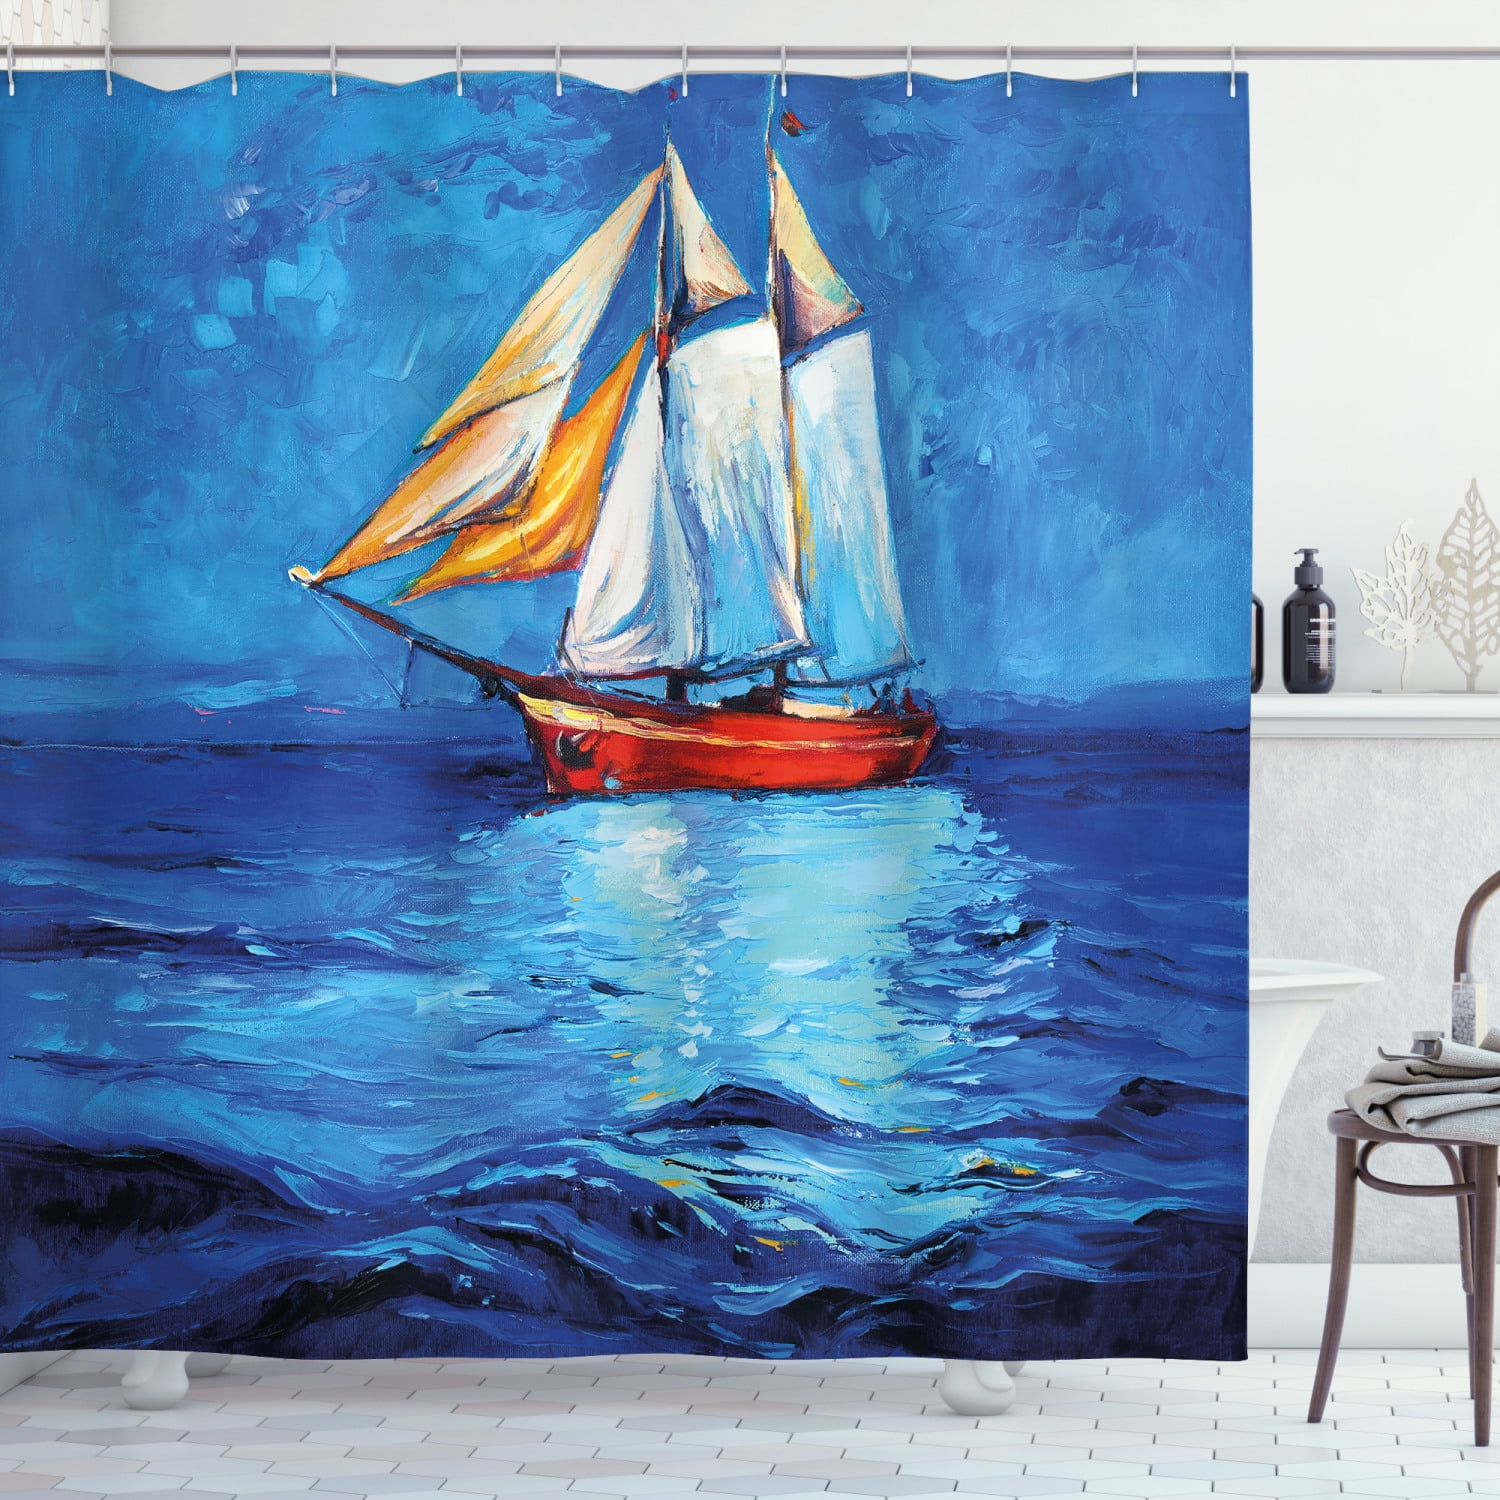 Waterproof Fabric Shower Curtain Set Oil Painting Style High Seas Pirate Ship